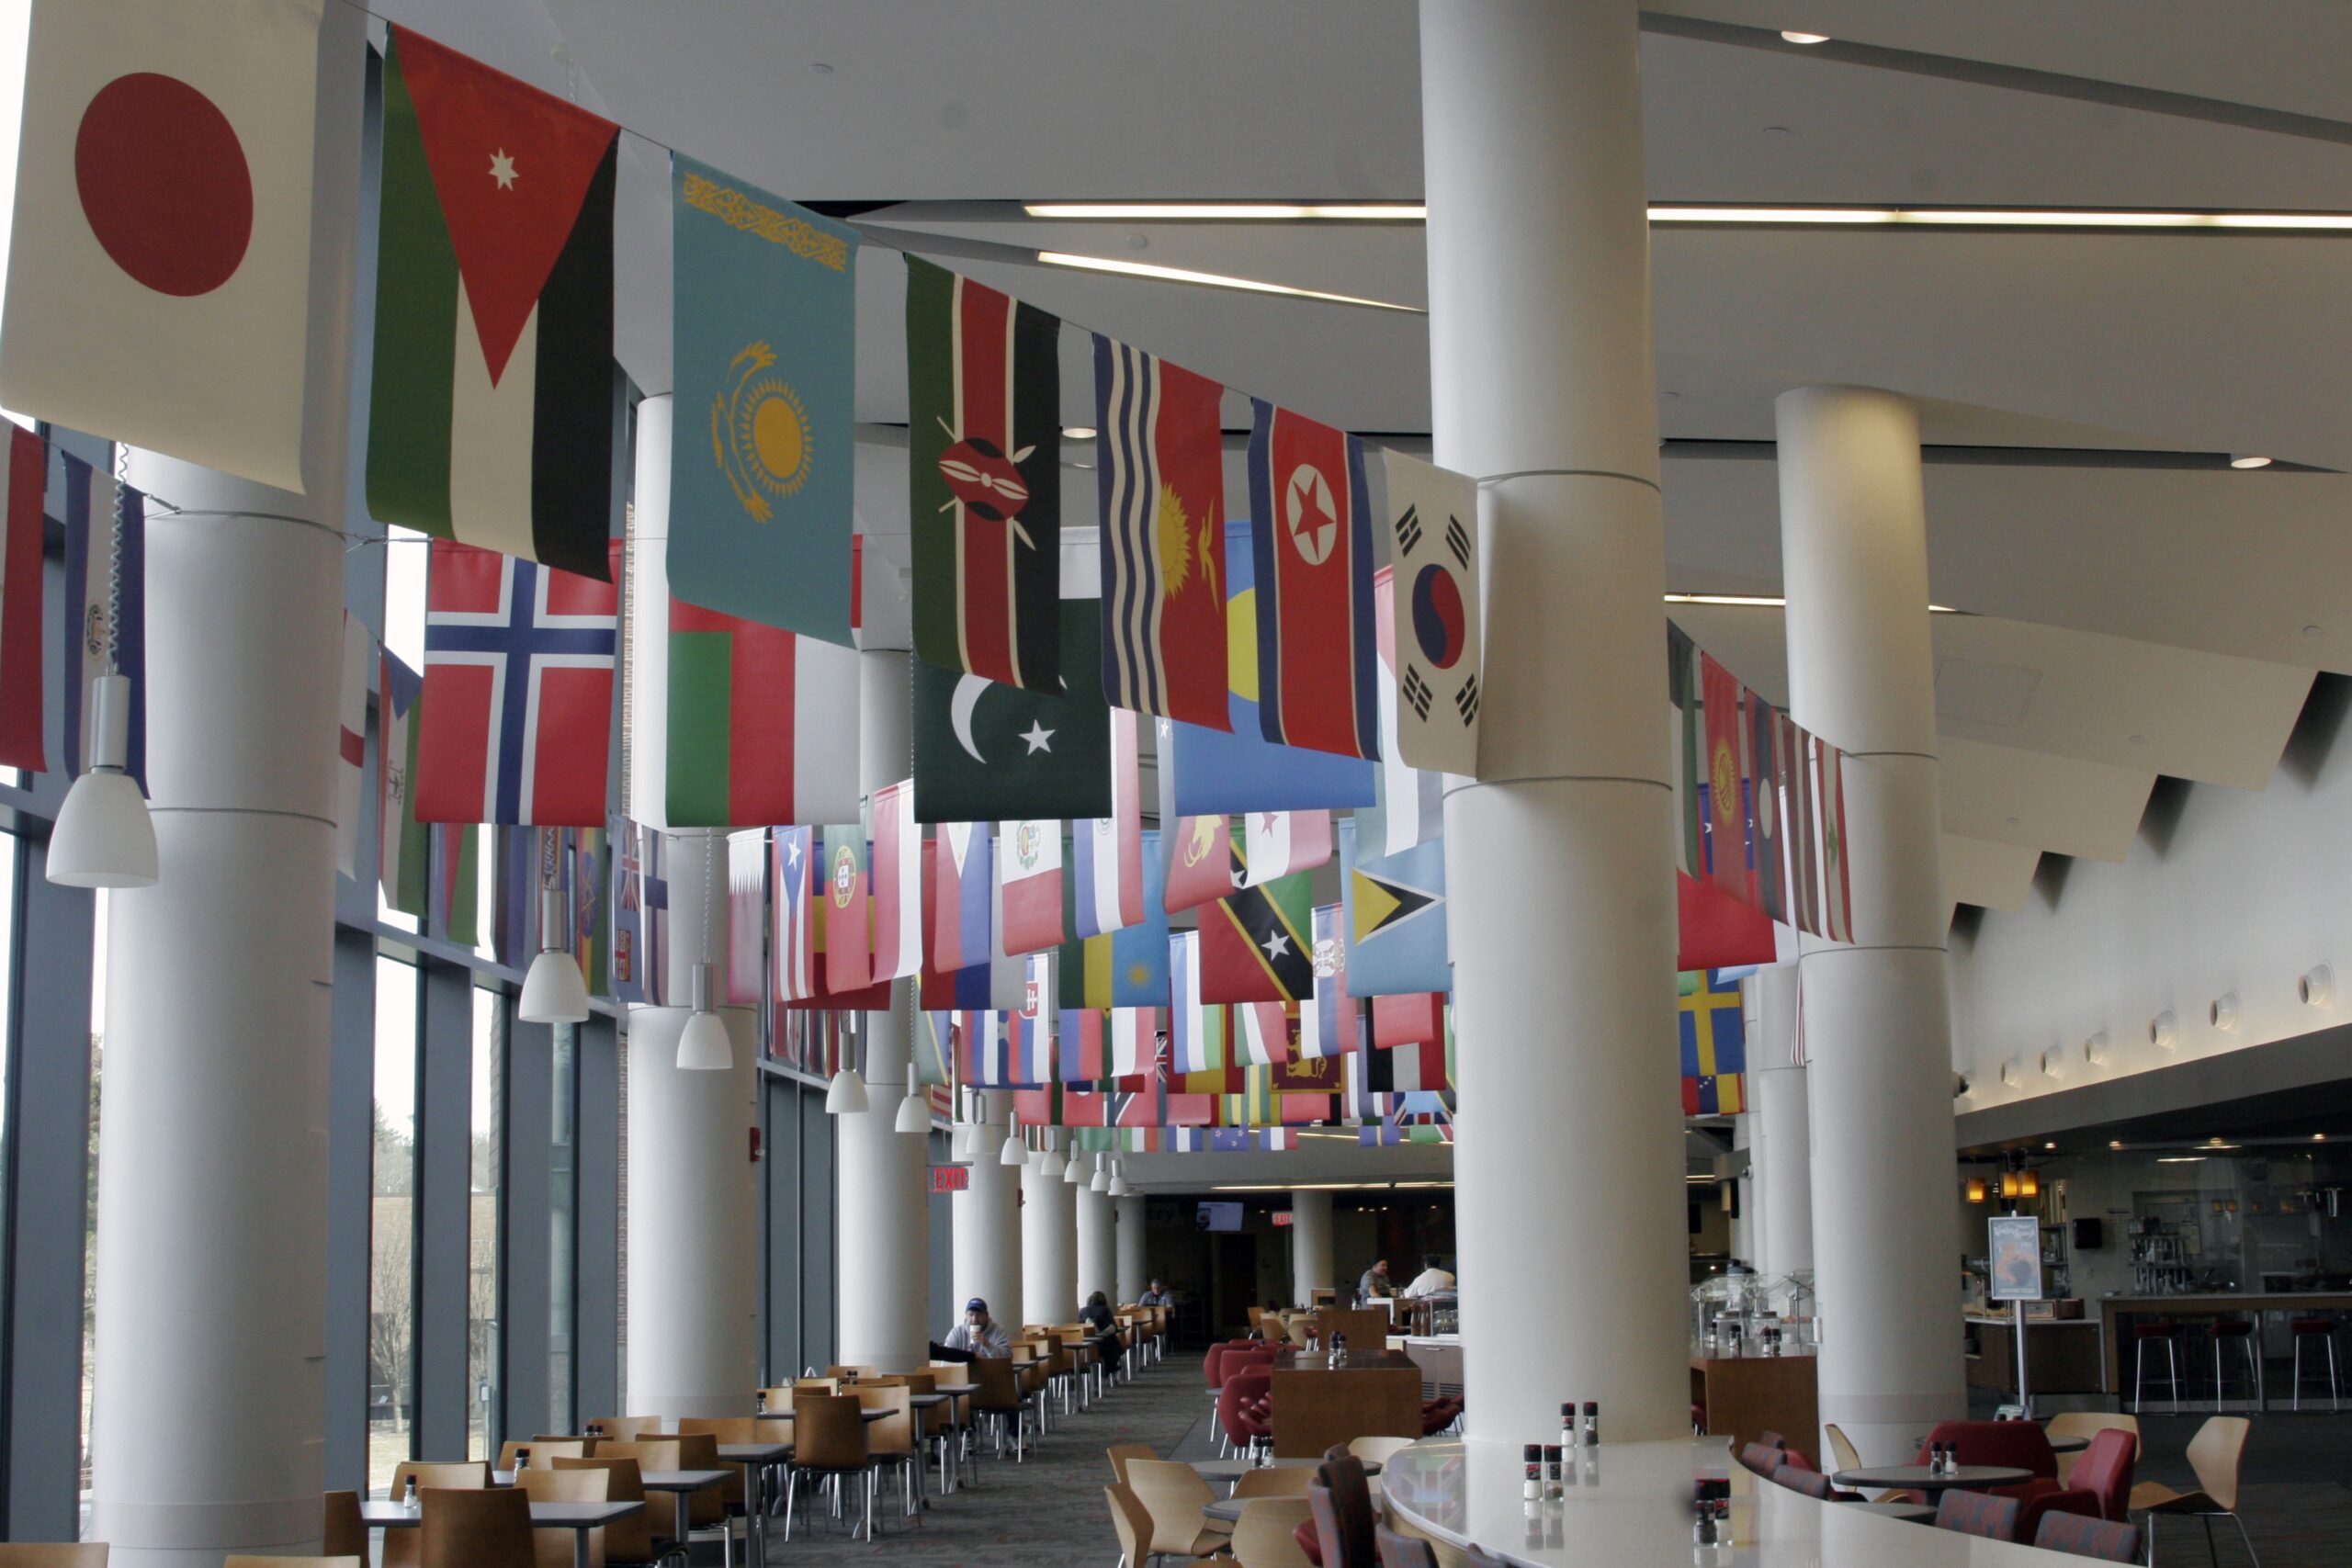 The Worcester state dinning hall where international flags hang from the ceiling